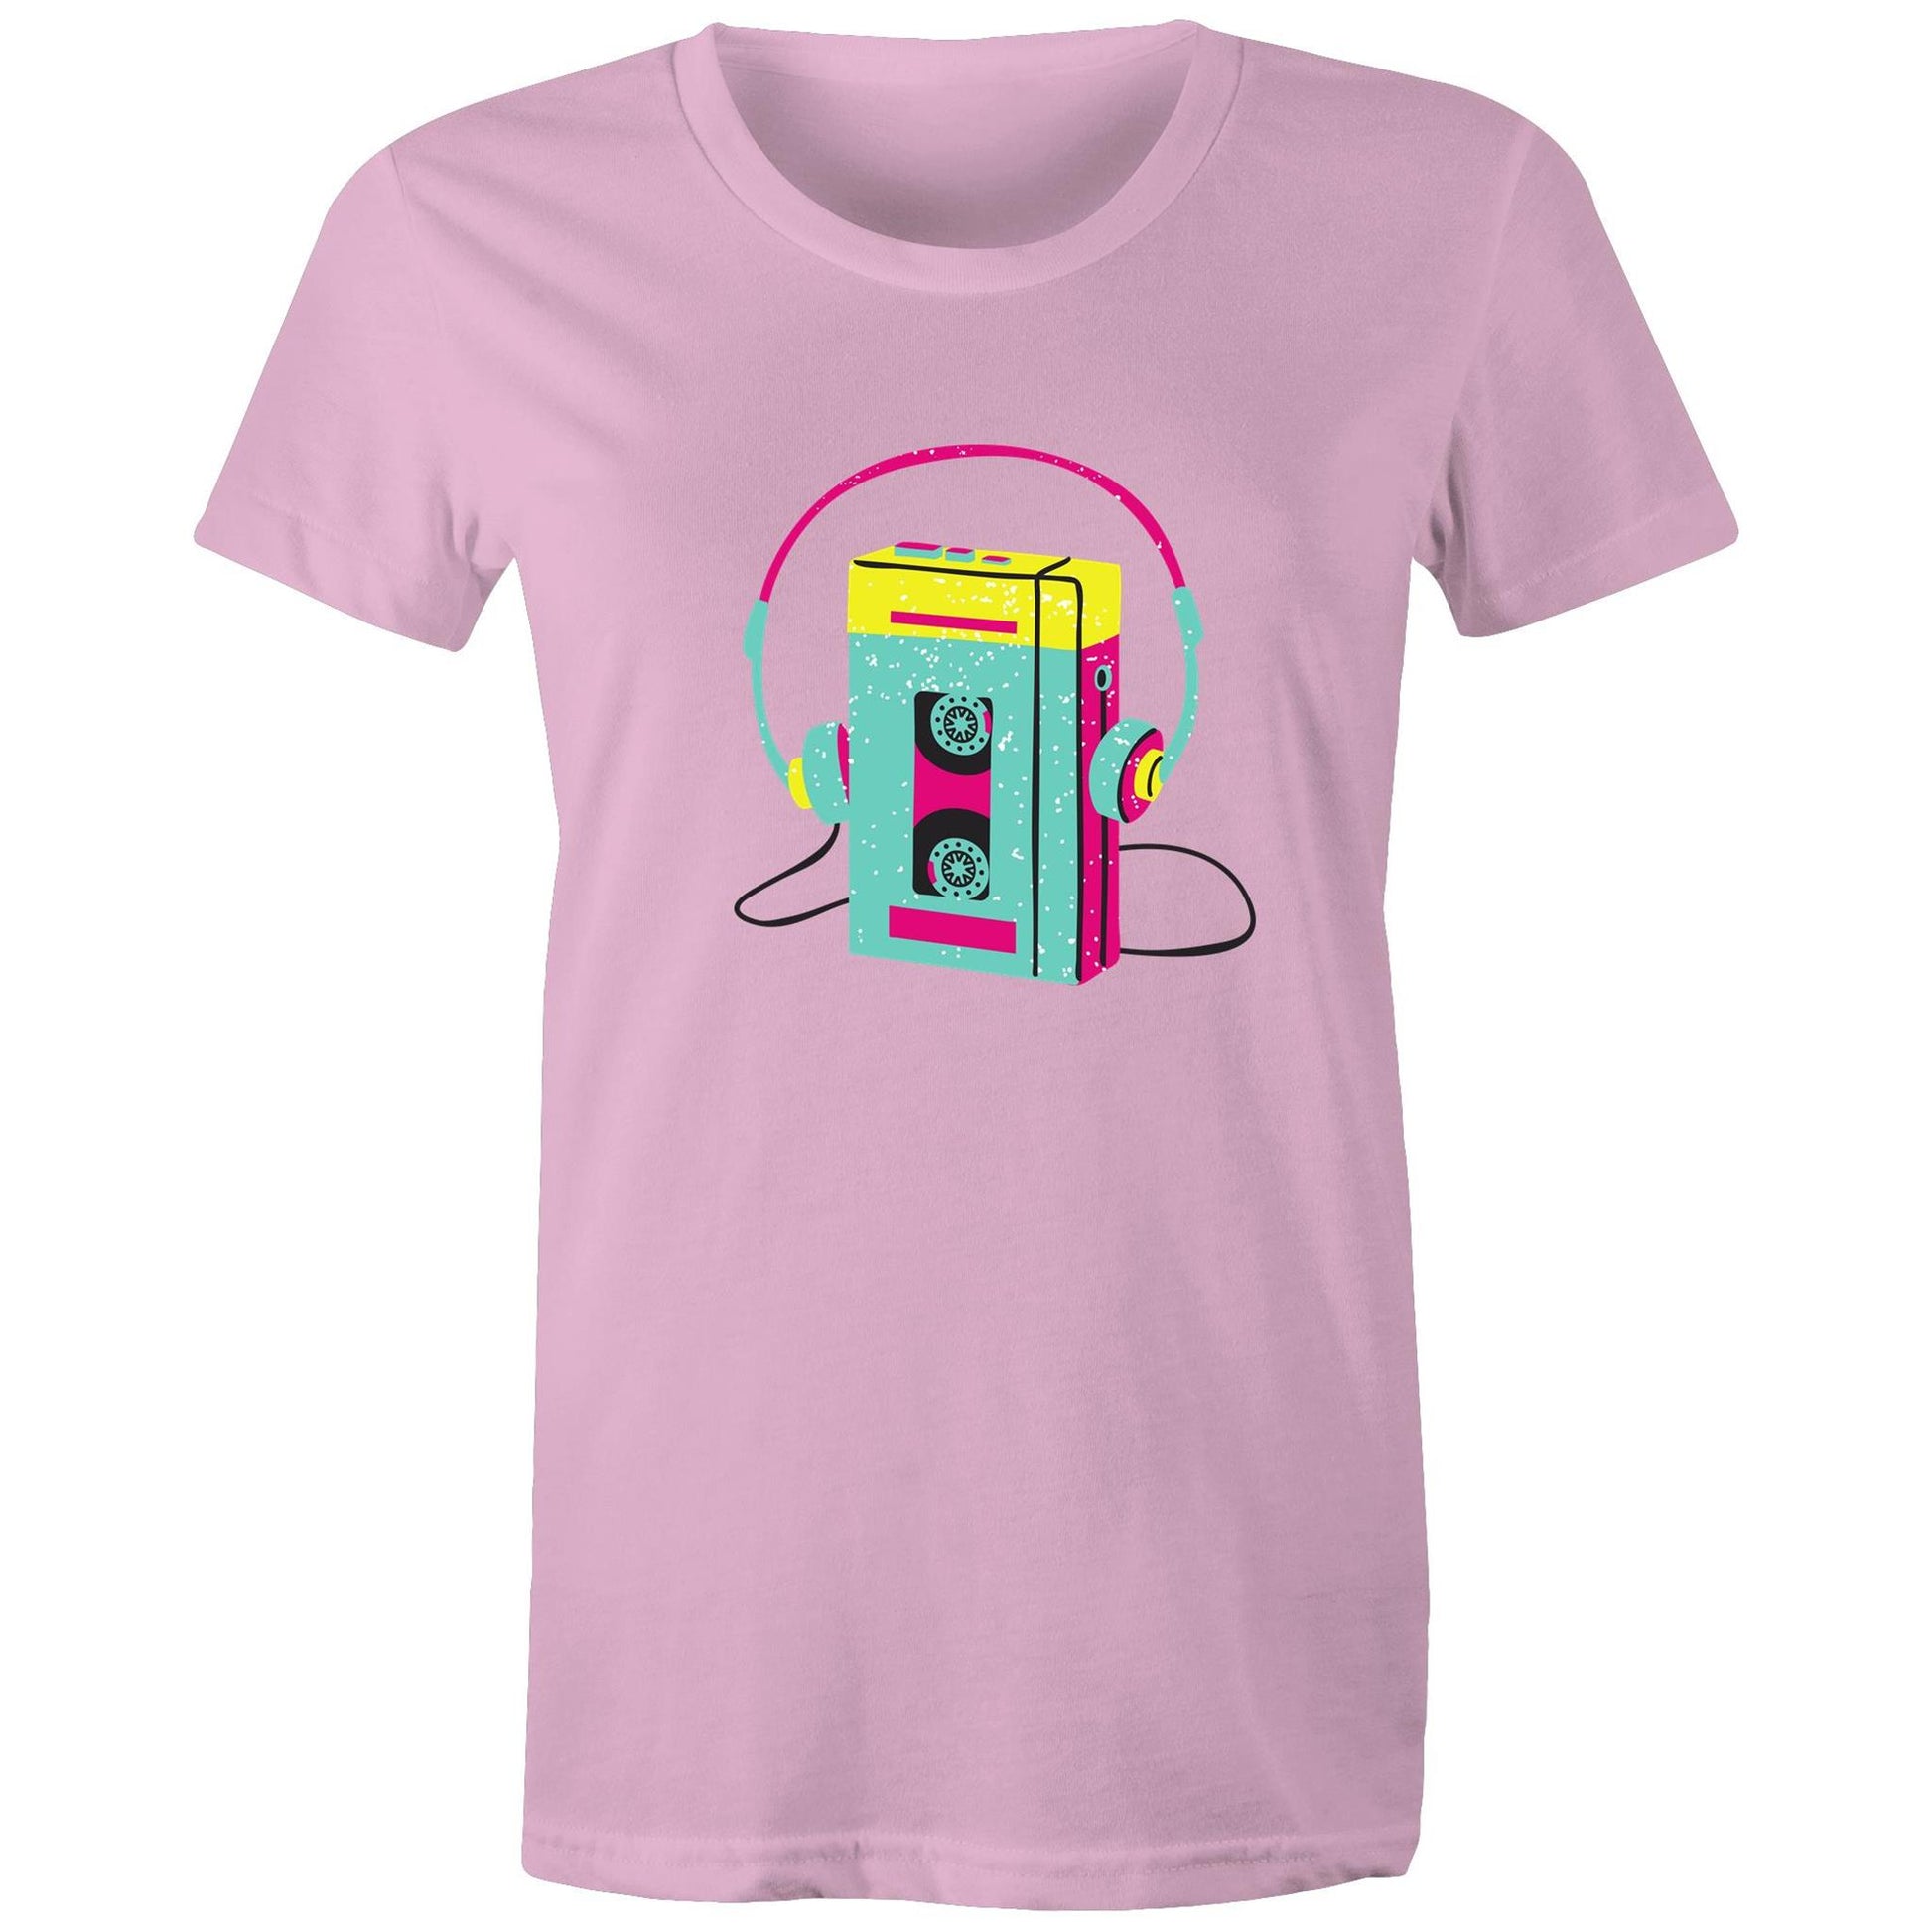 Wired For Sound, Music Player - Womens T-shirt Pink Womens T-shirt Music Retro Womens